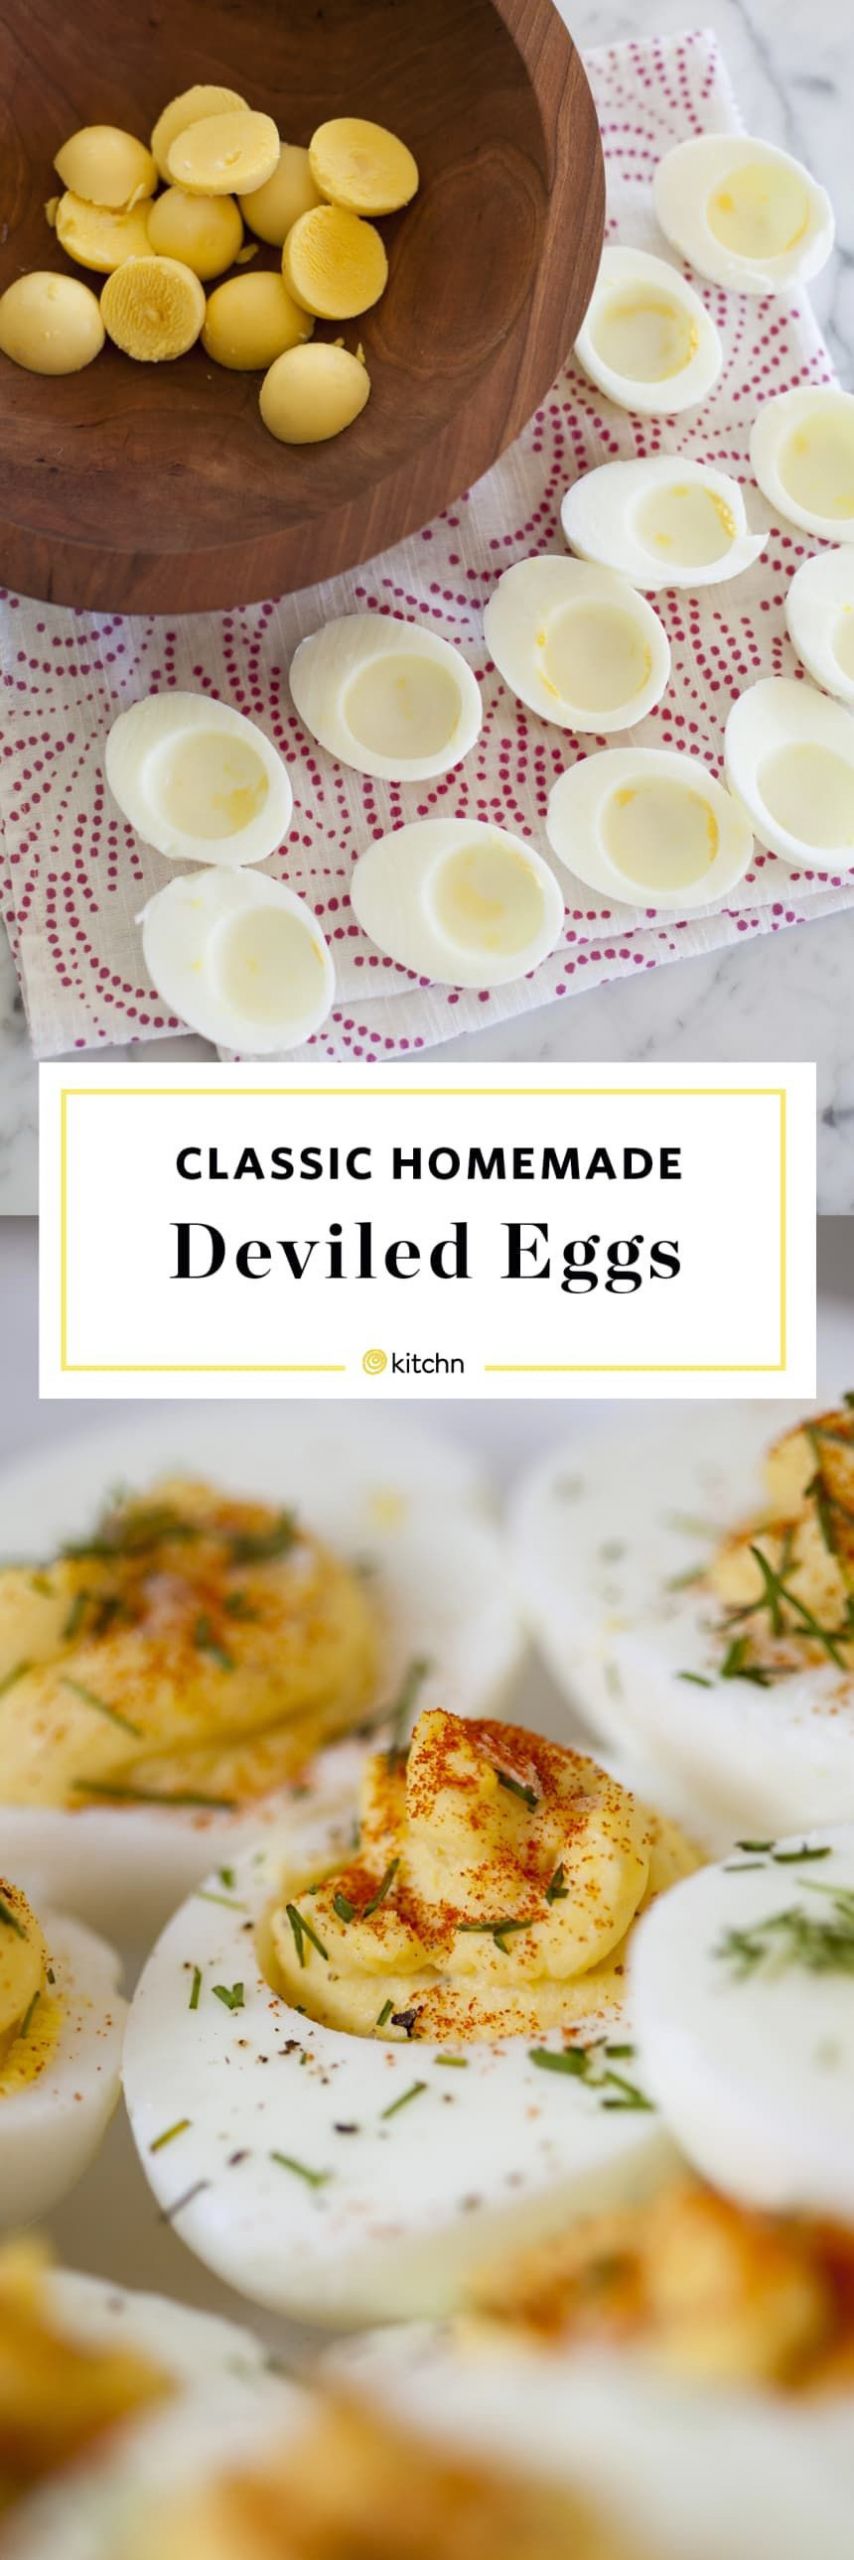 Best Way To Boil Eggs For Deviled Eggs
 How To Make Deviled Eggs Recipe